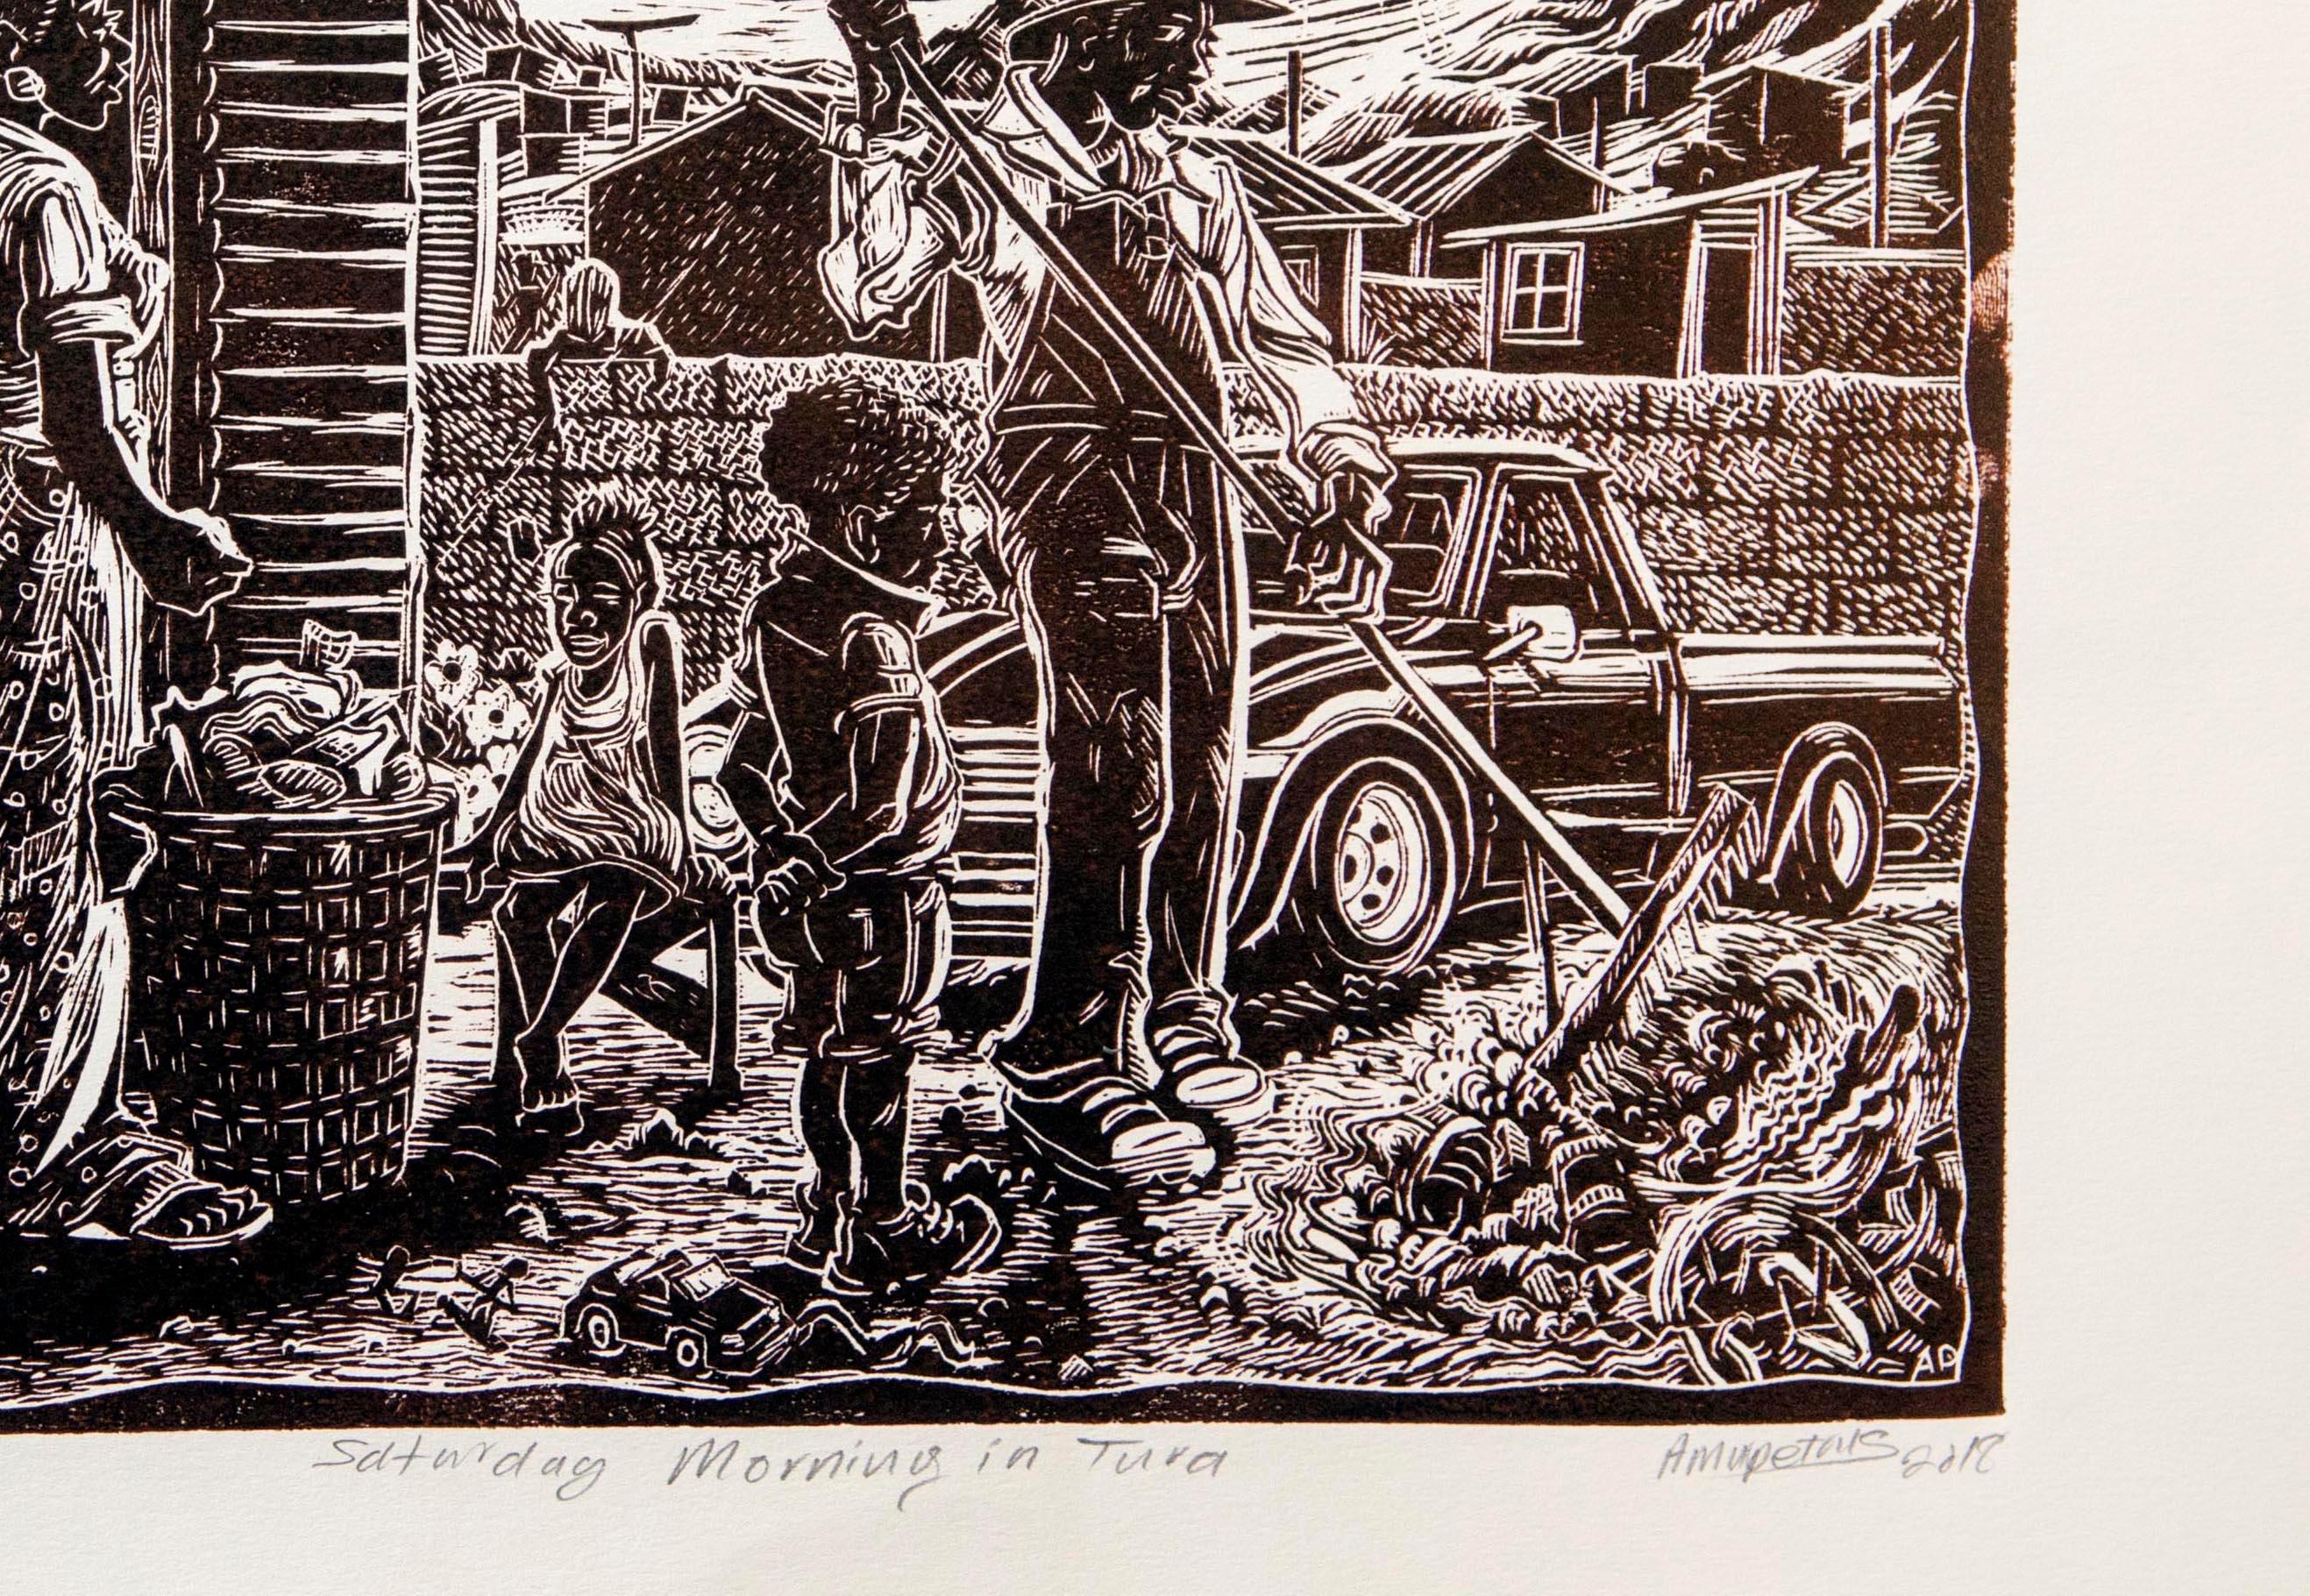 Saturday morning in Tura, 2018. Linoleum Block Print on Fabriano Paper, 1/50

Petrus Amuthenu was born in Swakopmund and grew up in northern Namibia in Uukwaludhi. In 2002 a chance encounter with the late artist Samuel Mbingilo at the Katutura